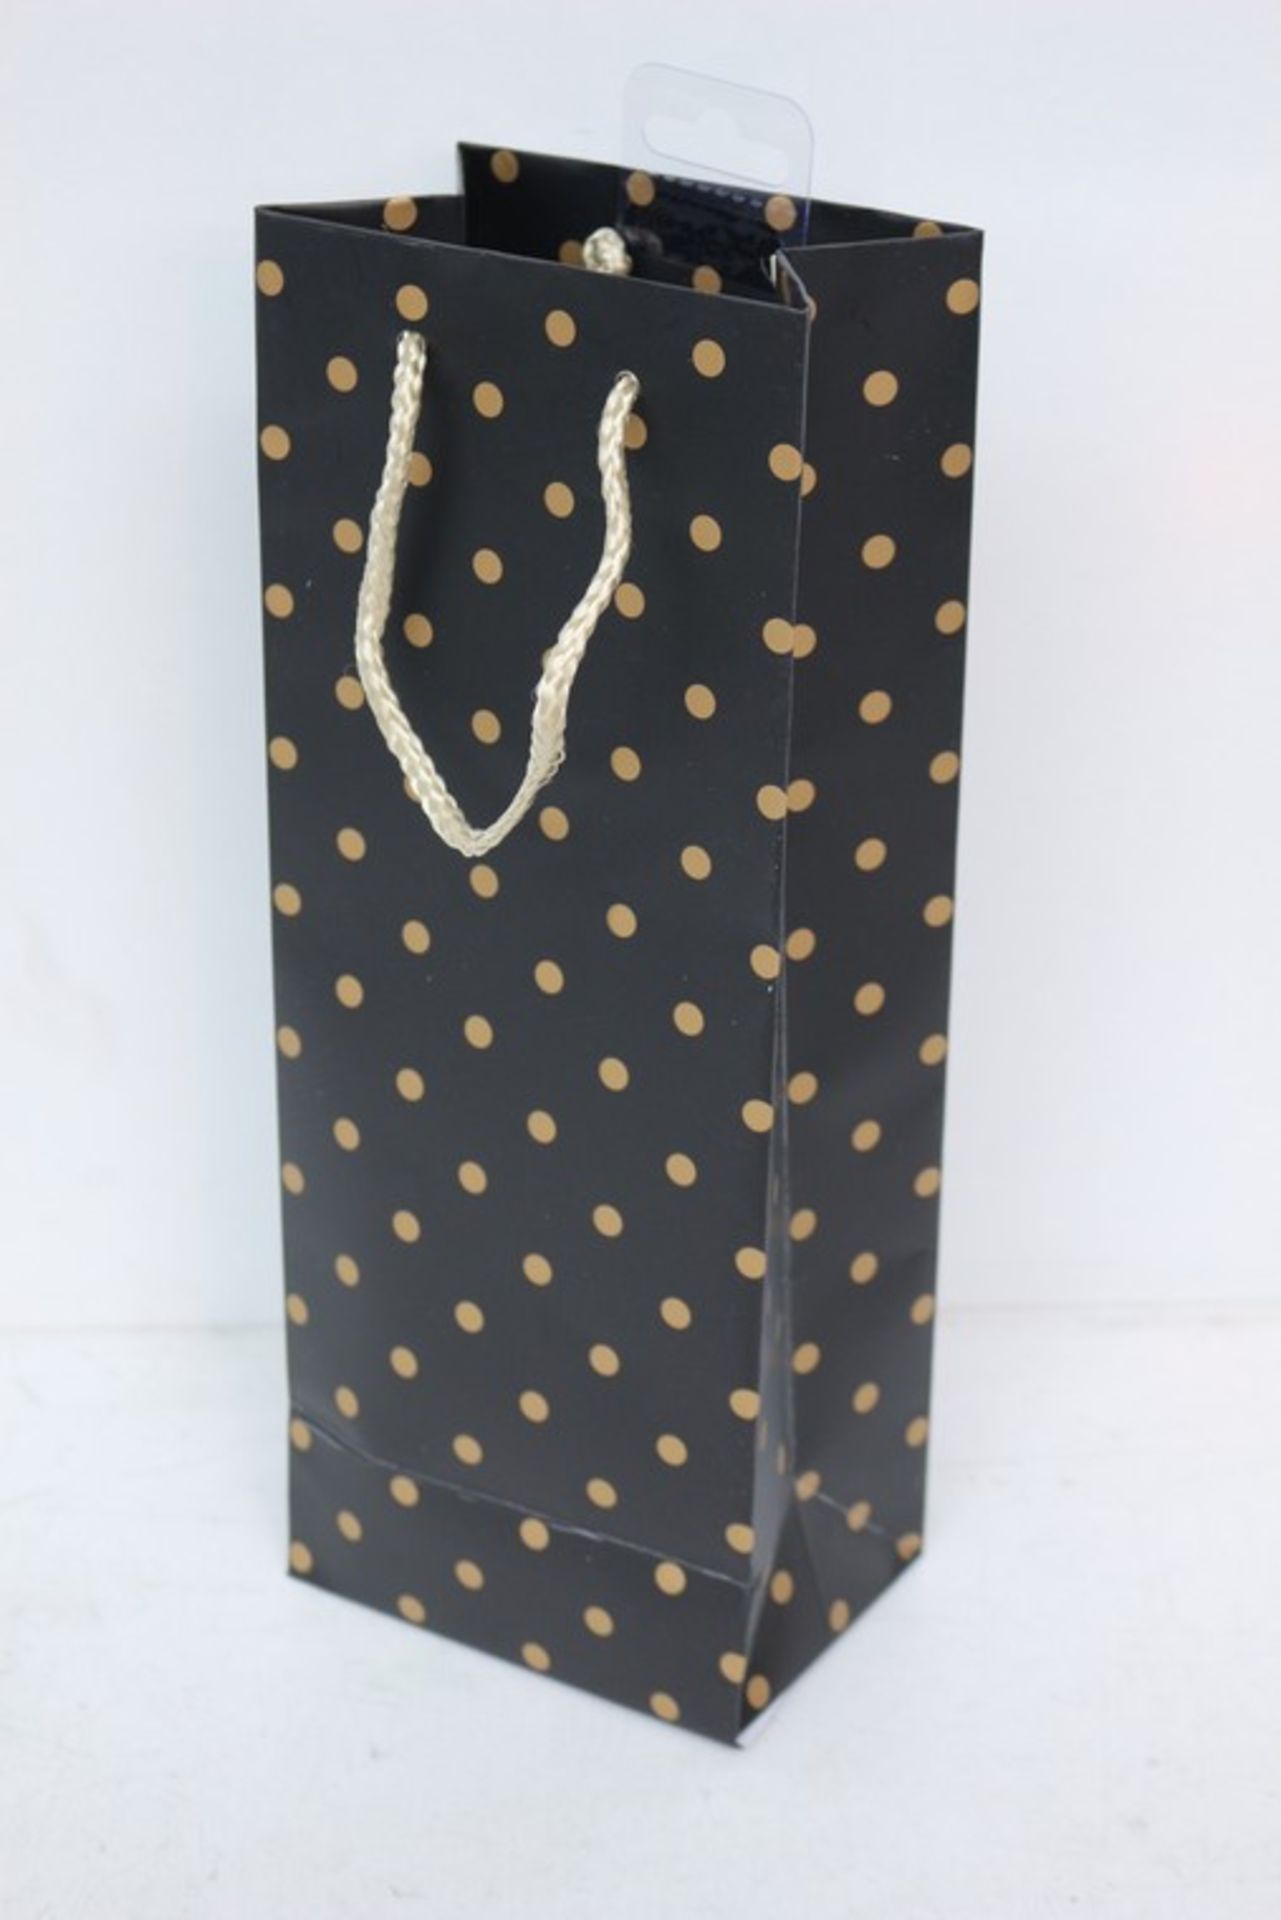 5 x BAGS EACH CONTAINING 12 BLACK BOTTLE BAGS WITH GOLD POLKA DOTS *PLEASE NOTE THAT THE BID PRICE